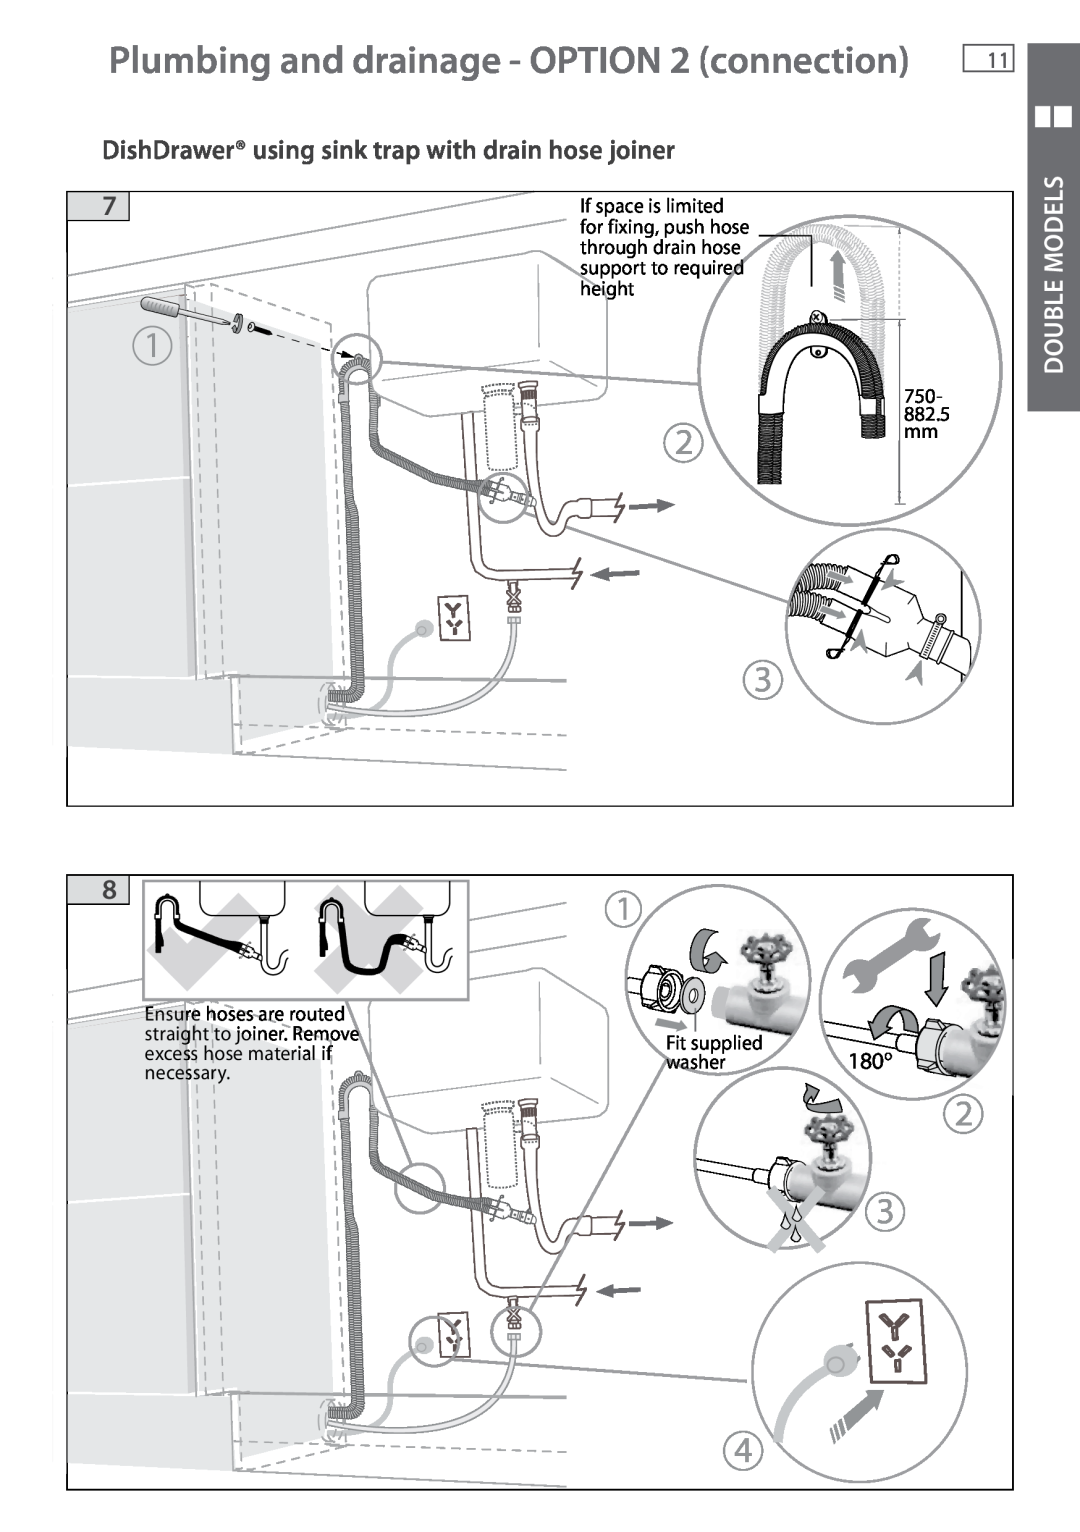 Fisher & Paykel DD605 Plumbing and drainage - OPTION 2 connection, DishDrawer using sink trap with drain hose joiner 